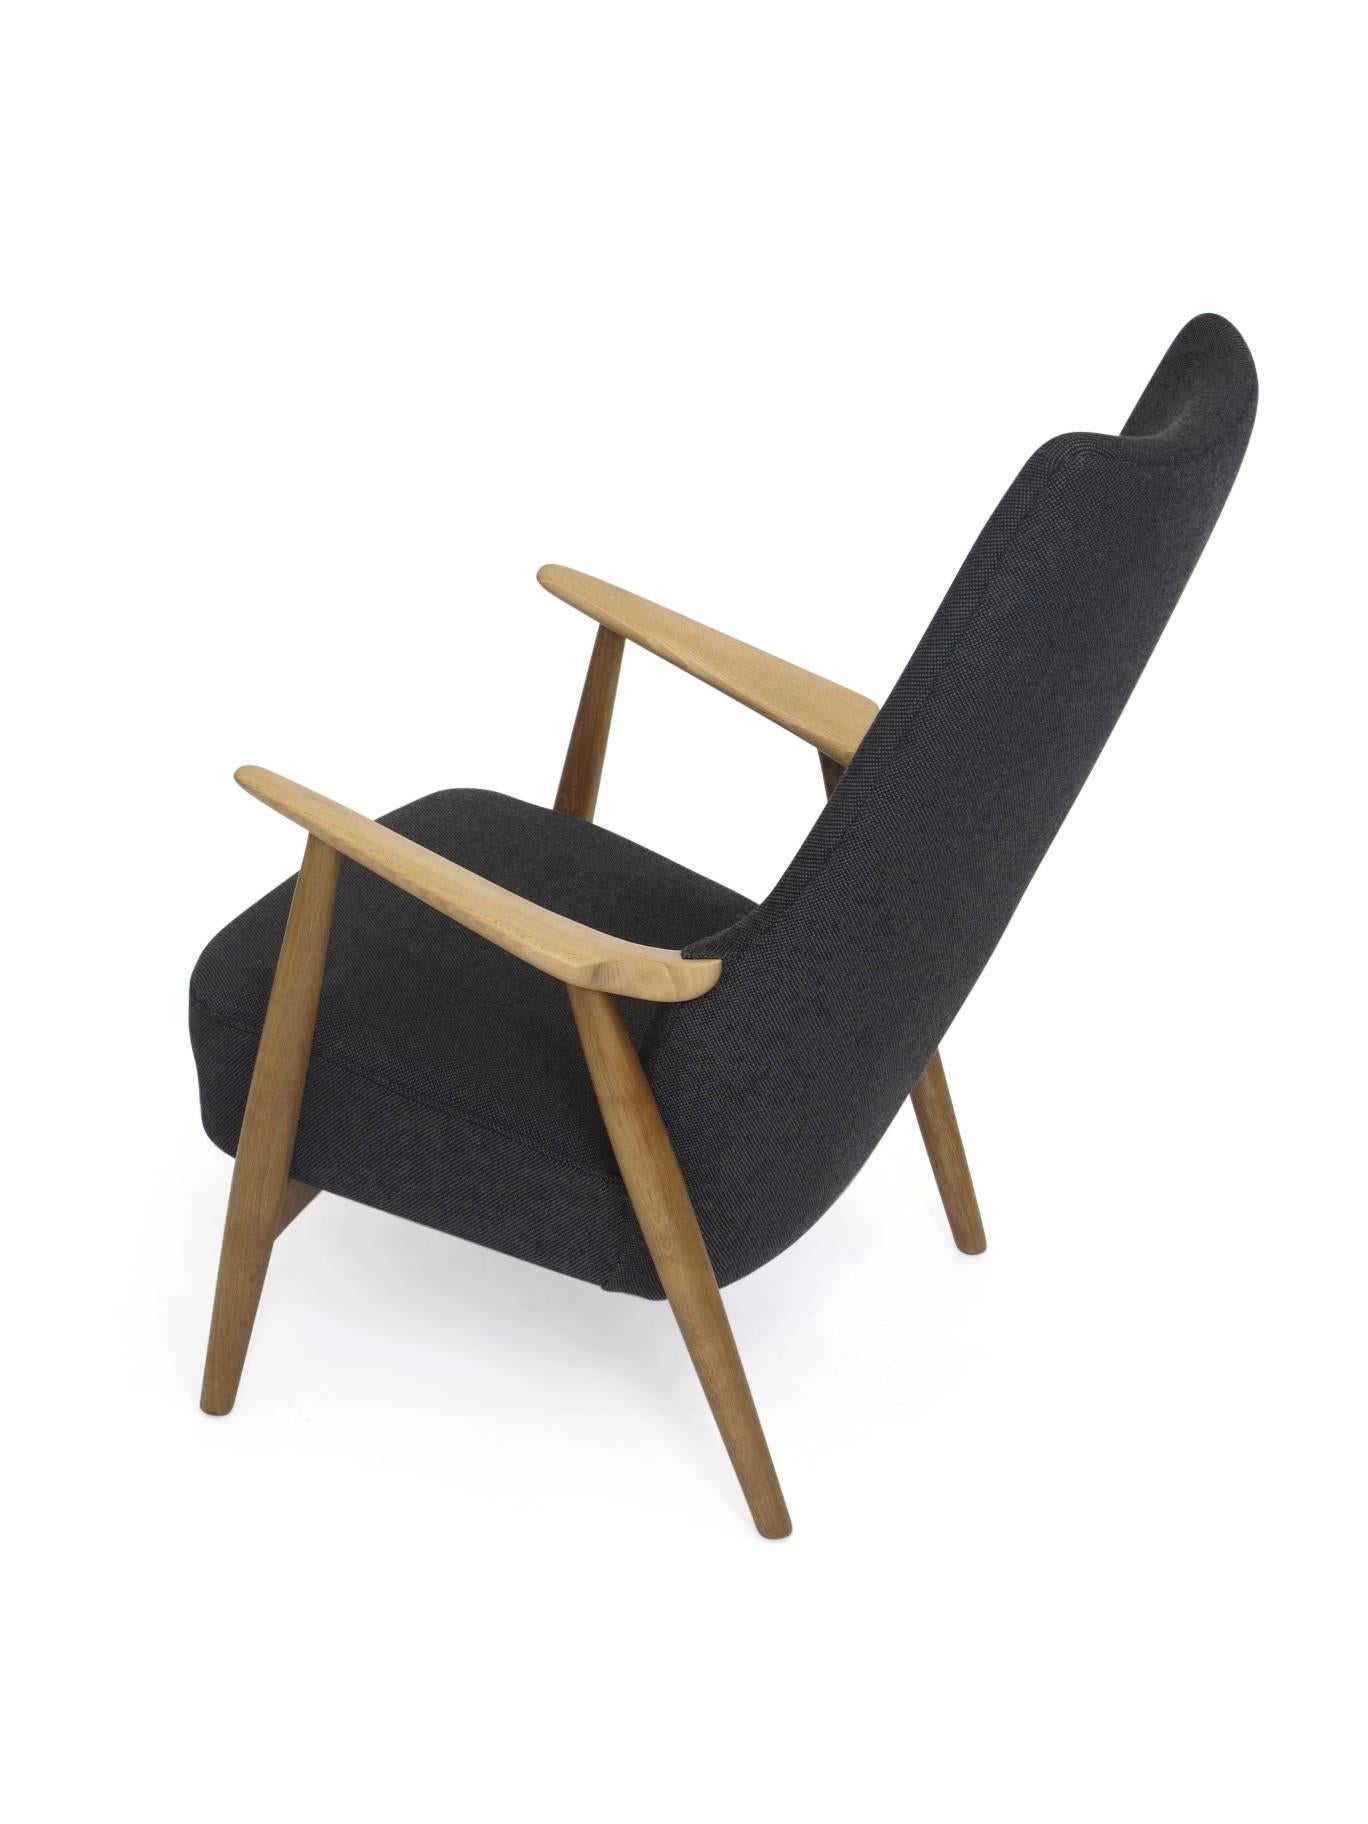 High back lounge chair designed by Hans Wegner features a white oak frame with beech arms, newly upholstered in a dark grey wool fabric with black leather button tufting. Chair is fully restored and in a excellent condition.